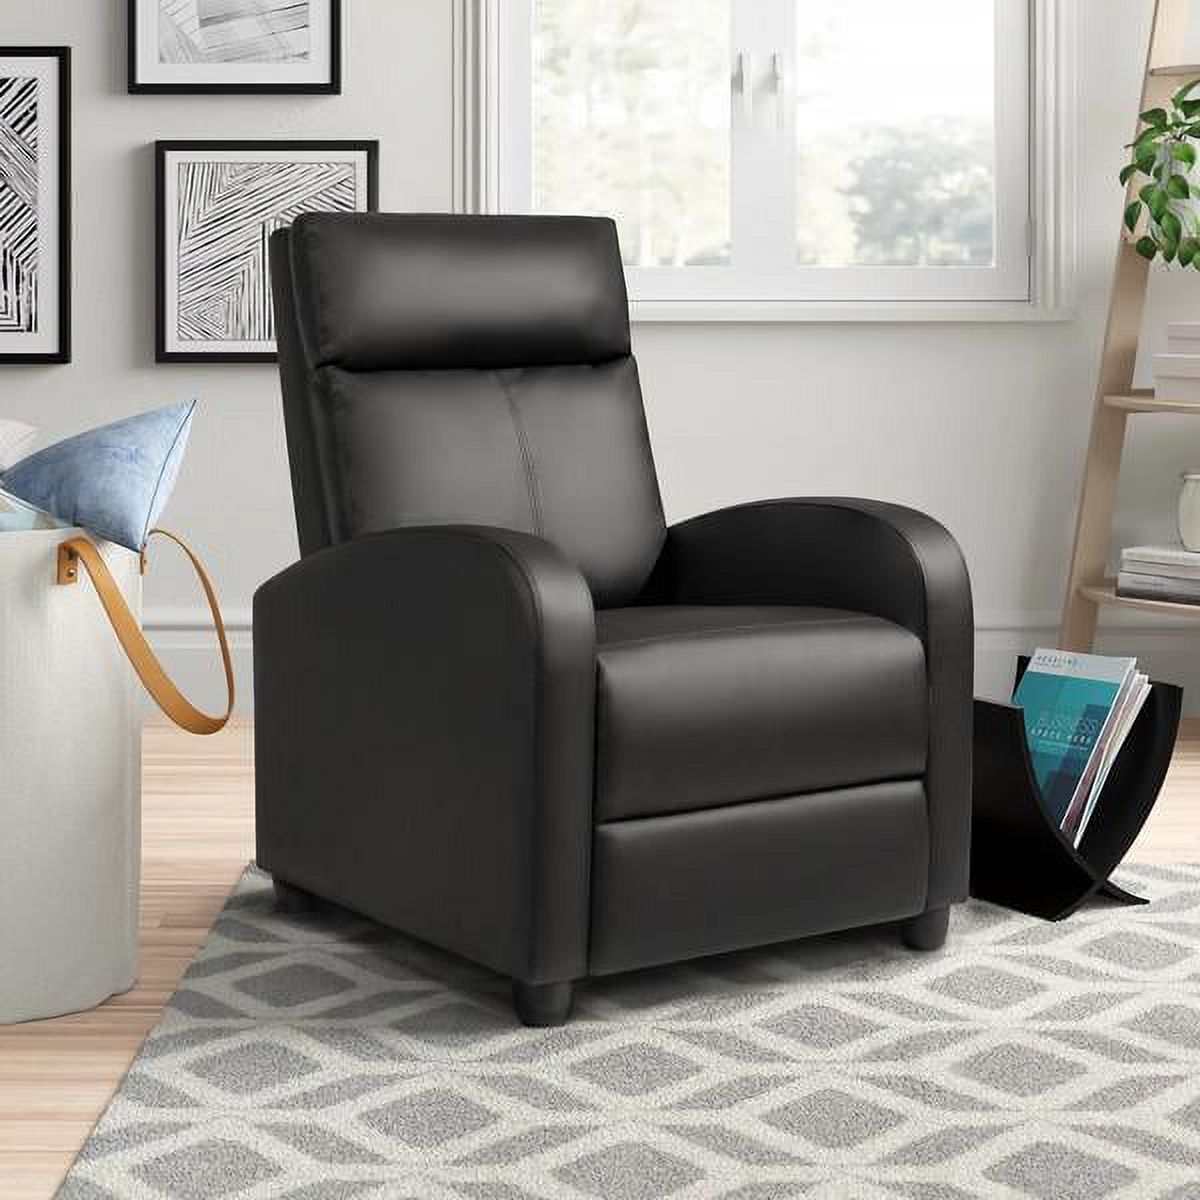 Lacoo Home Theater Recliner with Padded Seat and Backrest, Black - image 2 of 8